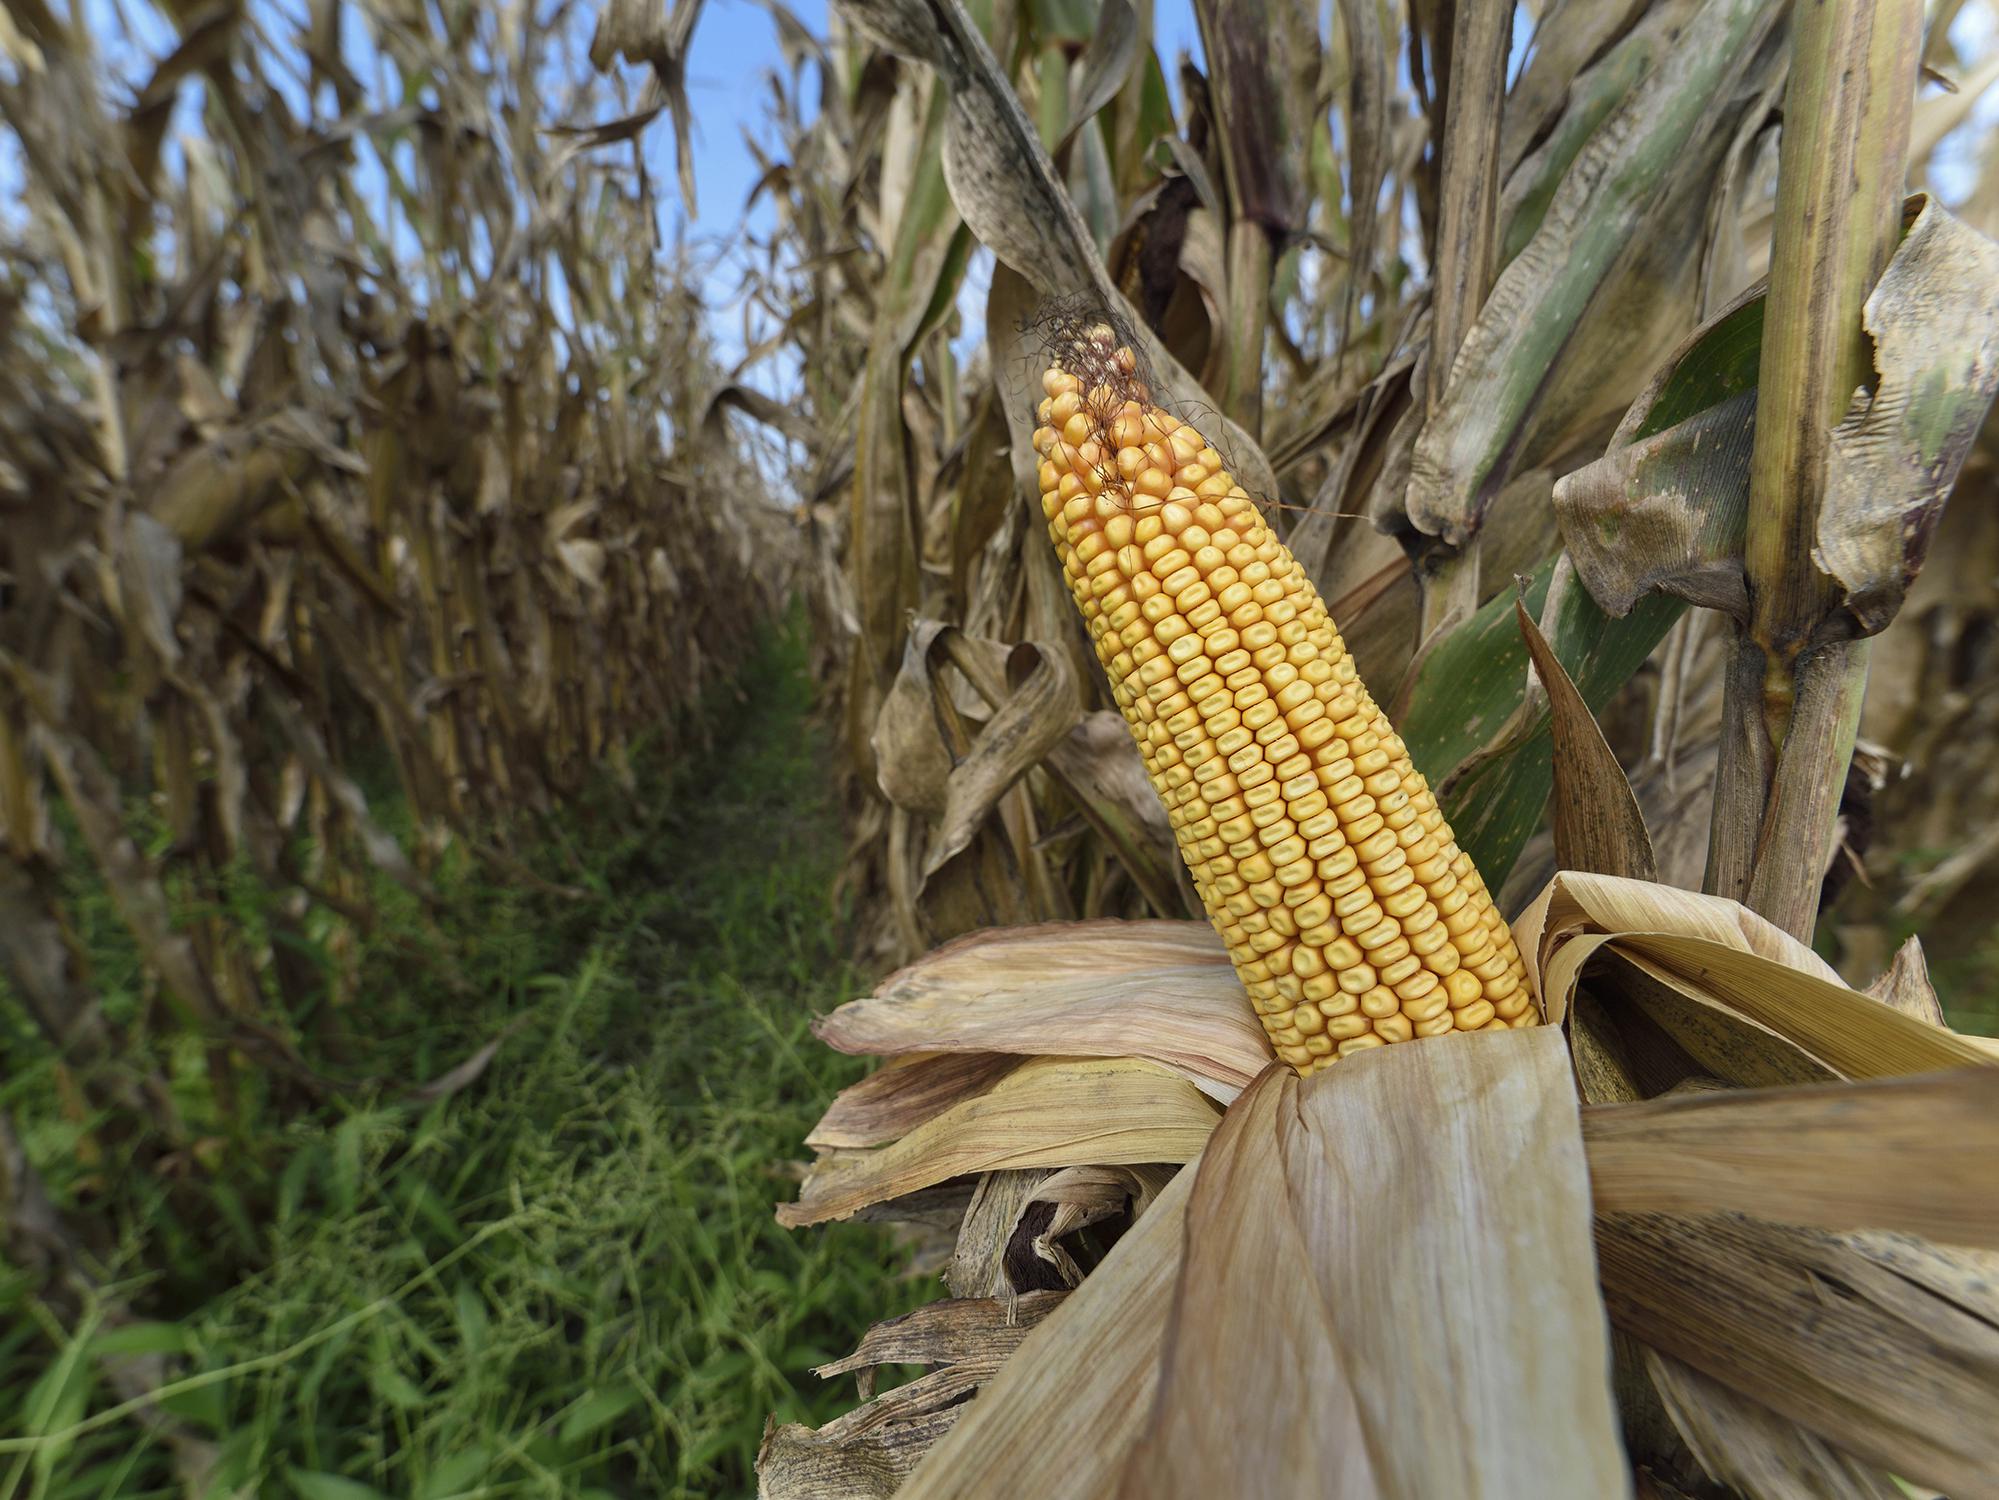 A golden ear of corn with the husks pulled back is attached to a dried stalk in a cornfield.